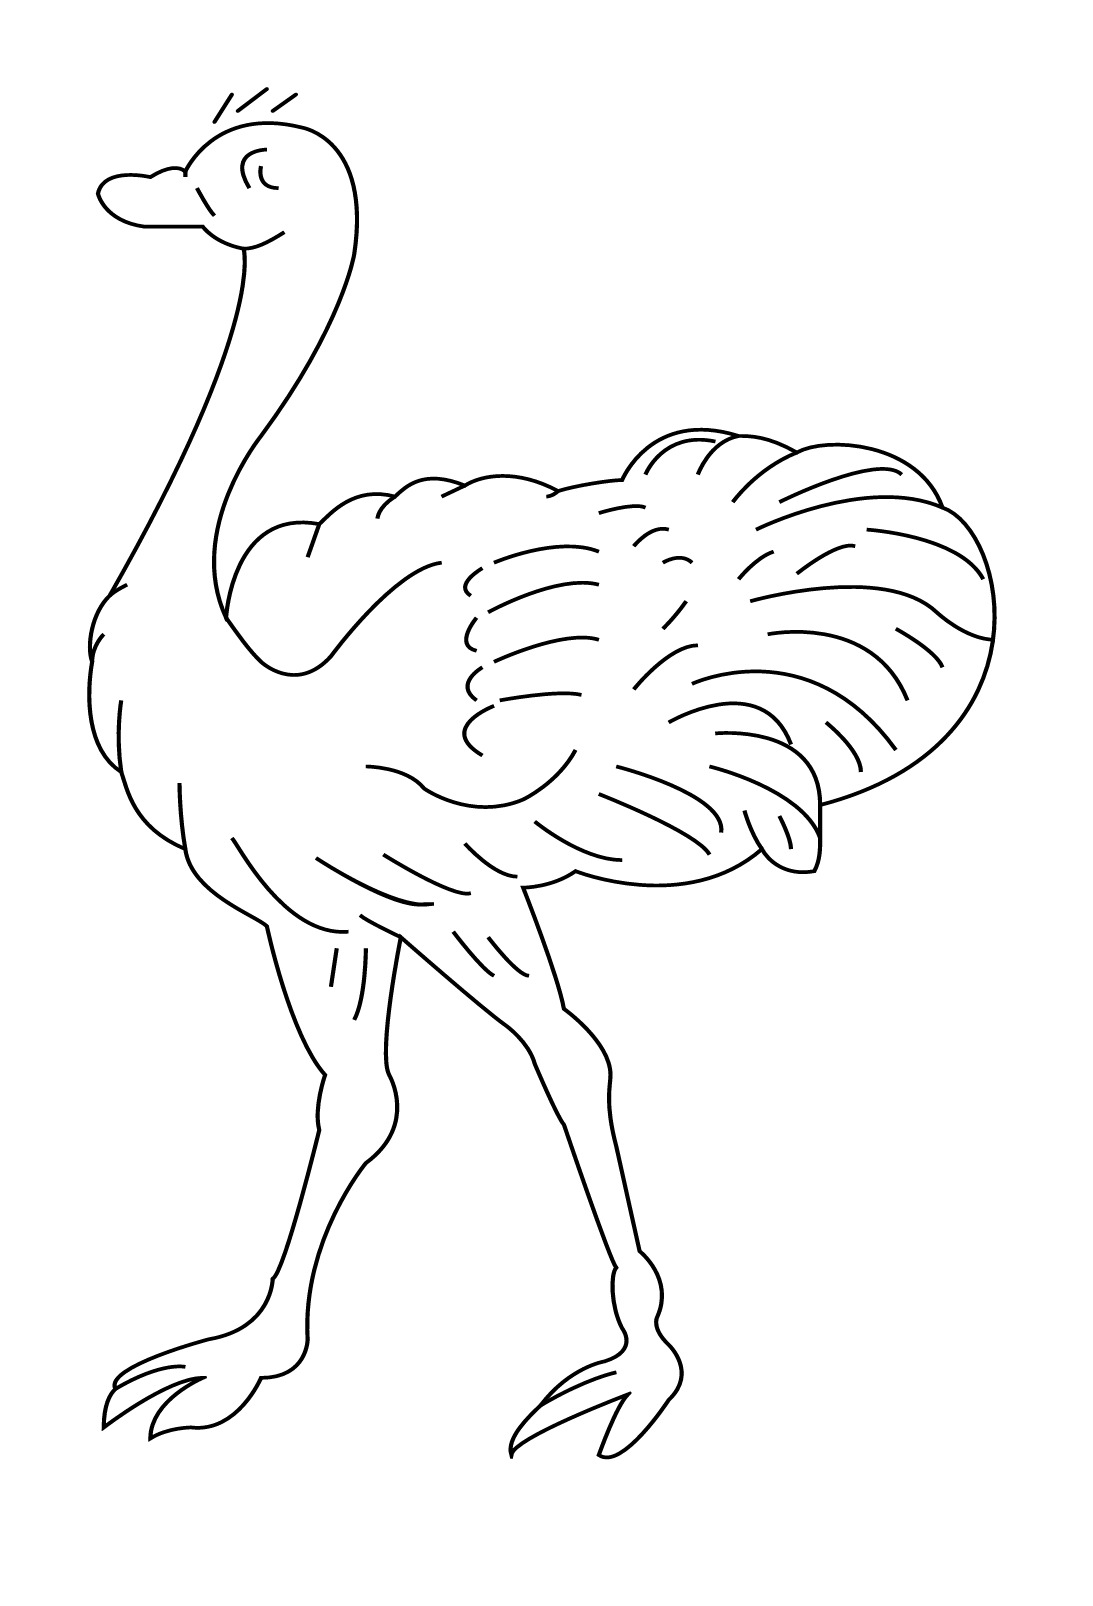 Ostrich (Animals) - Printable coloring pages